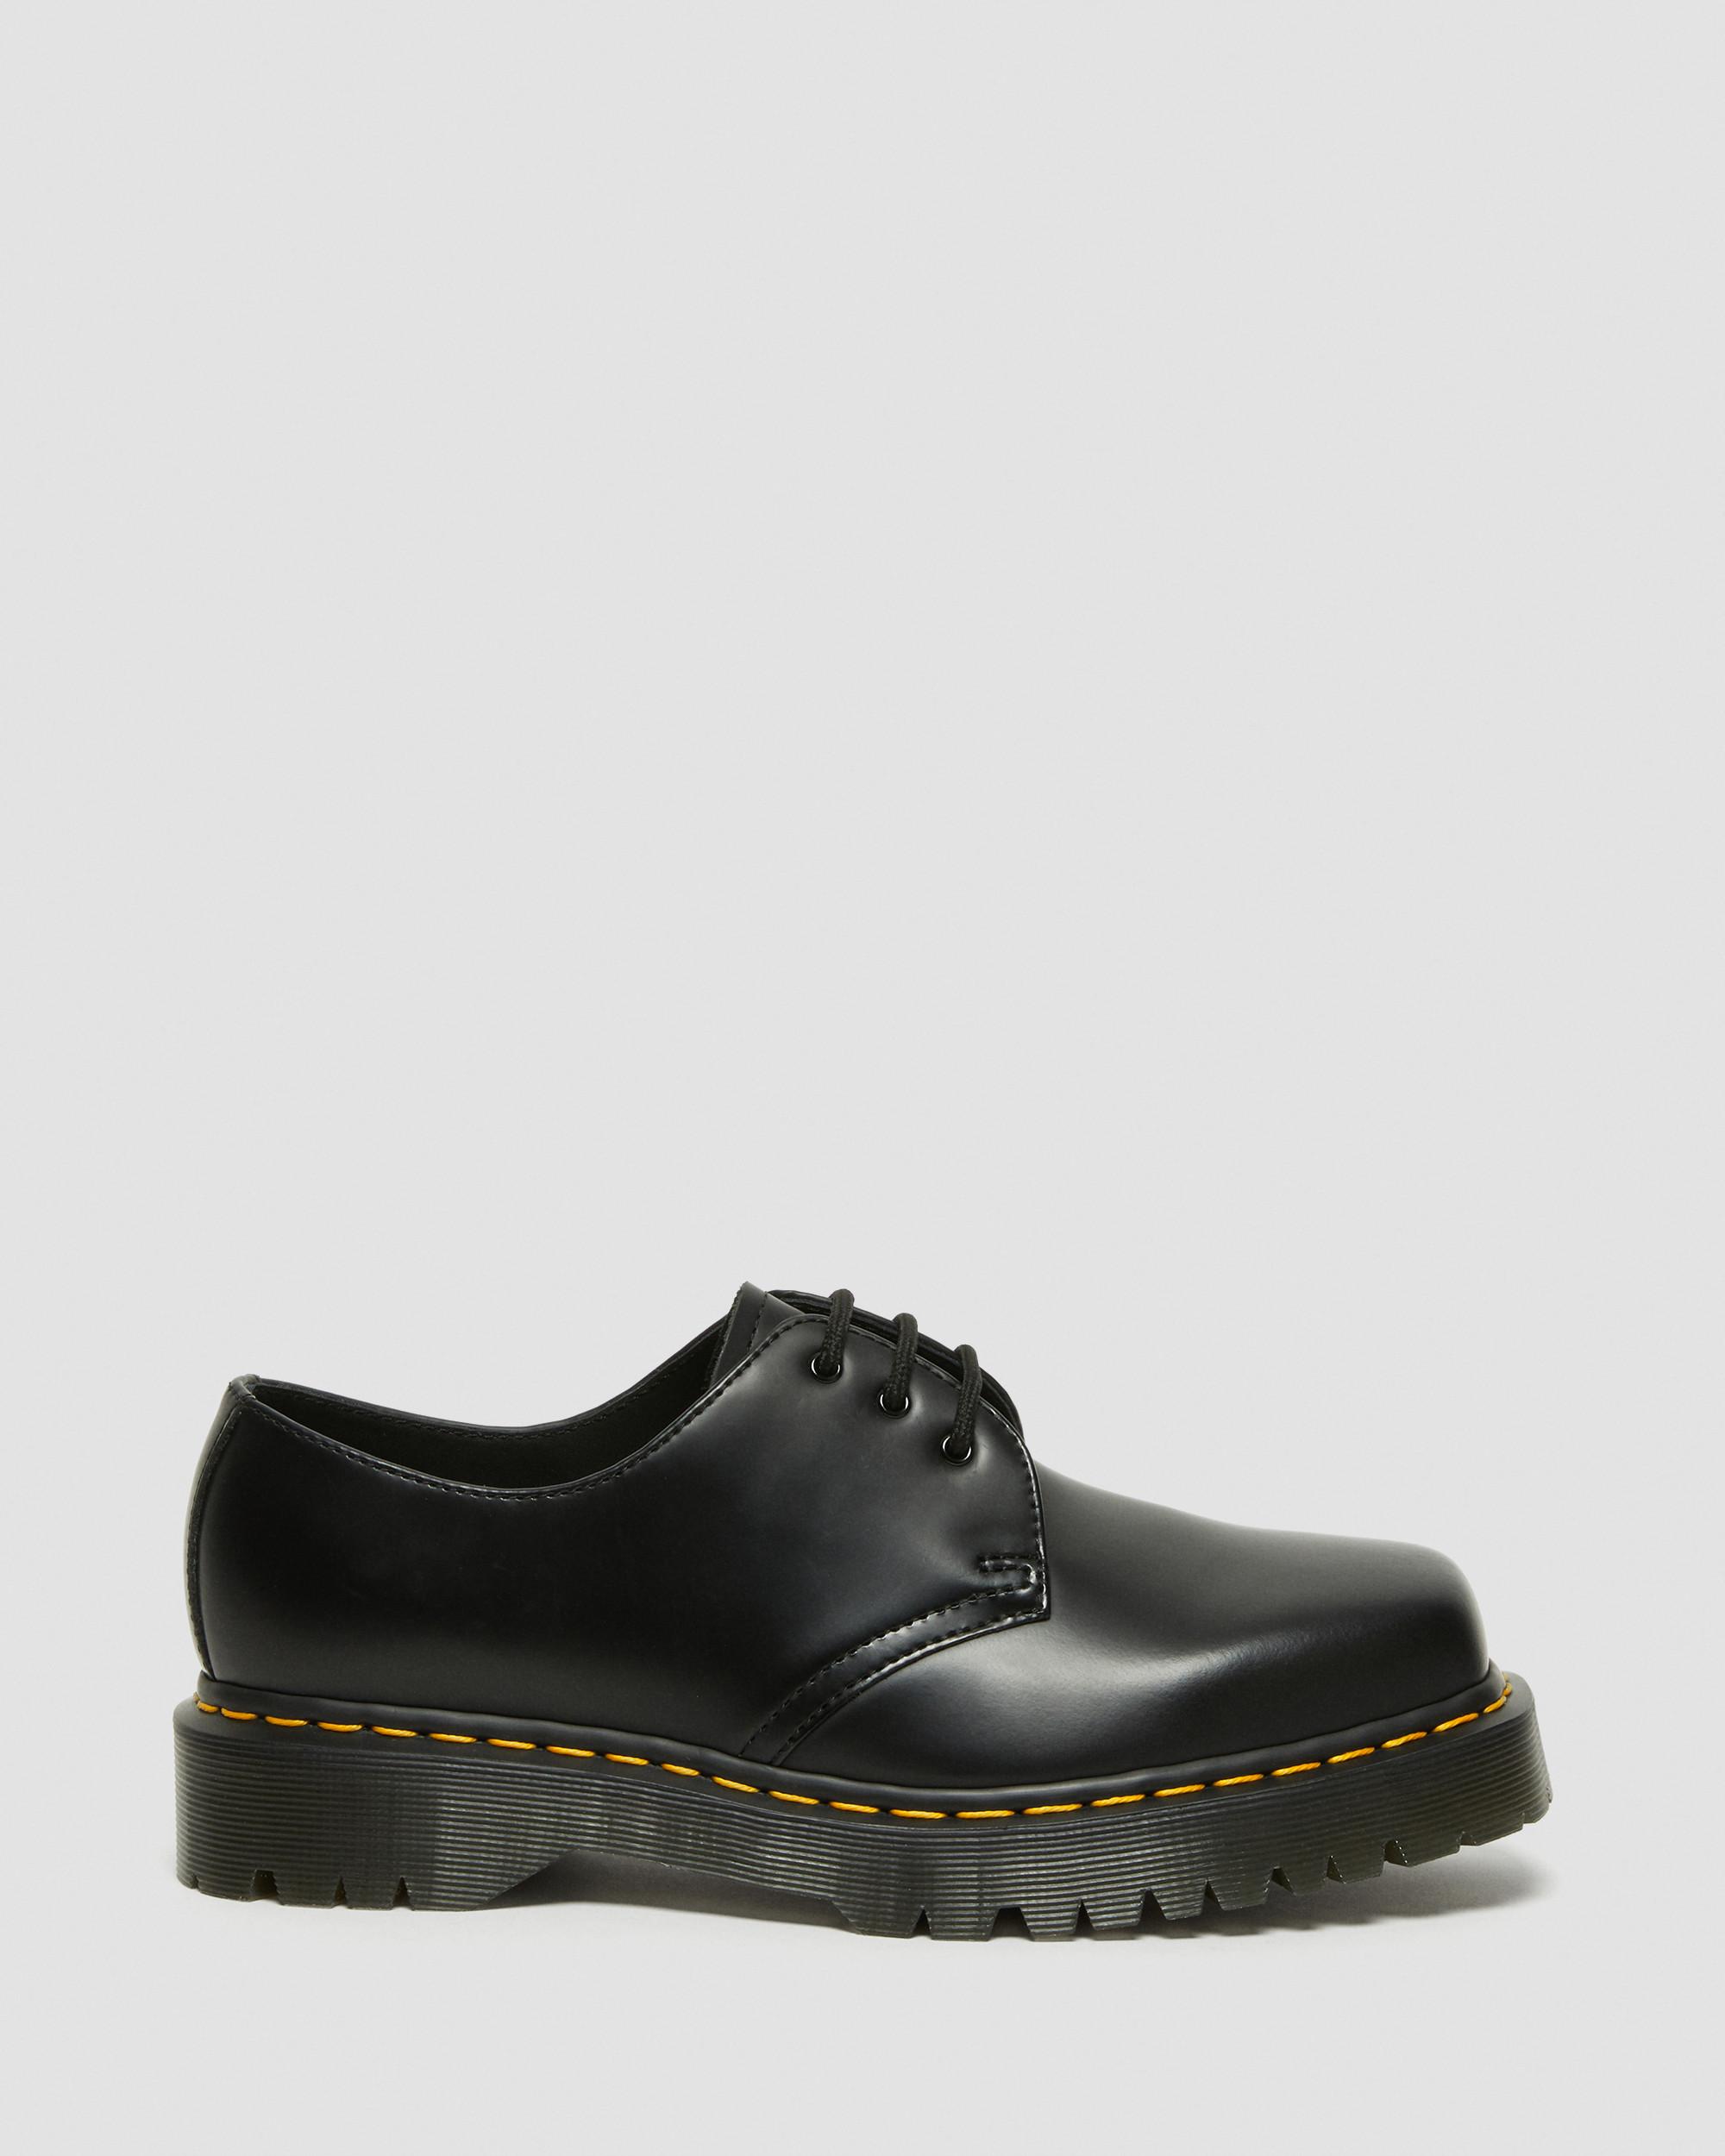 1461 Bex Squared Toe Leather Oxford Shoes in Black | Dr. Martens